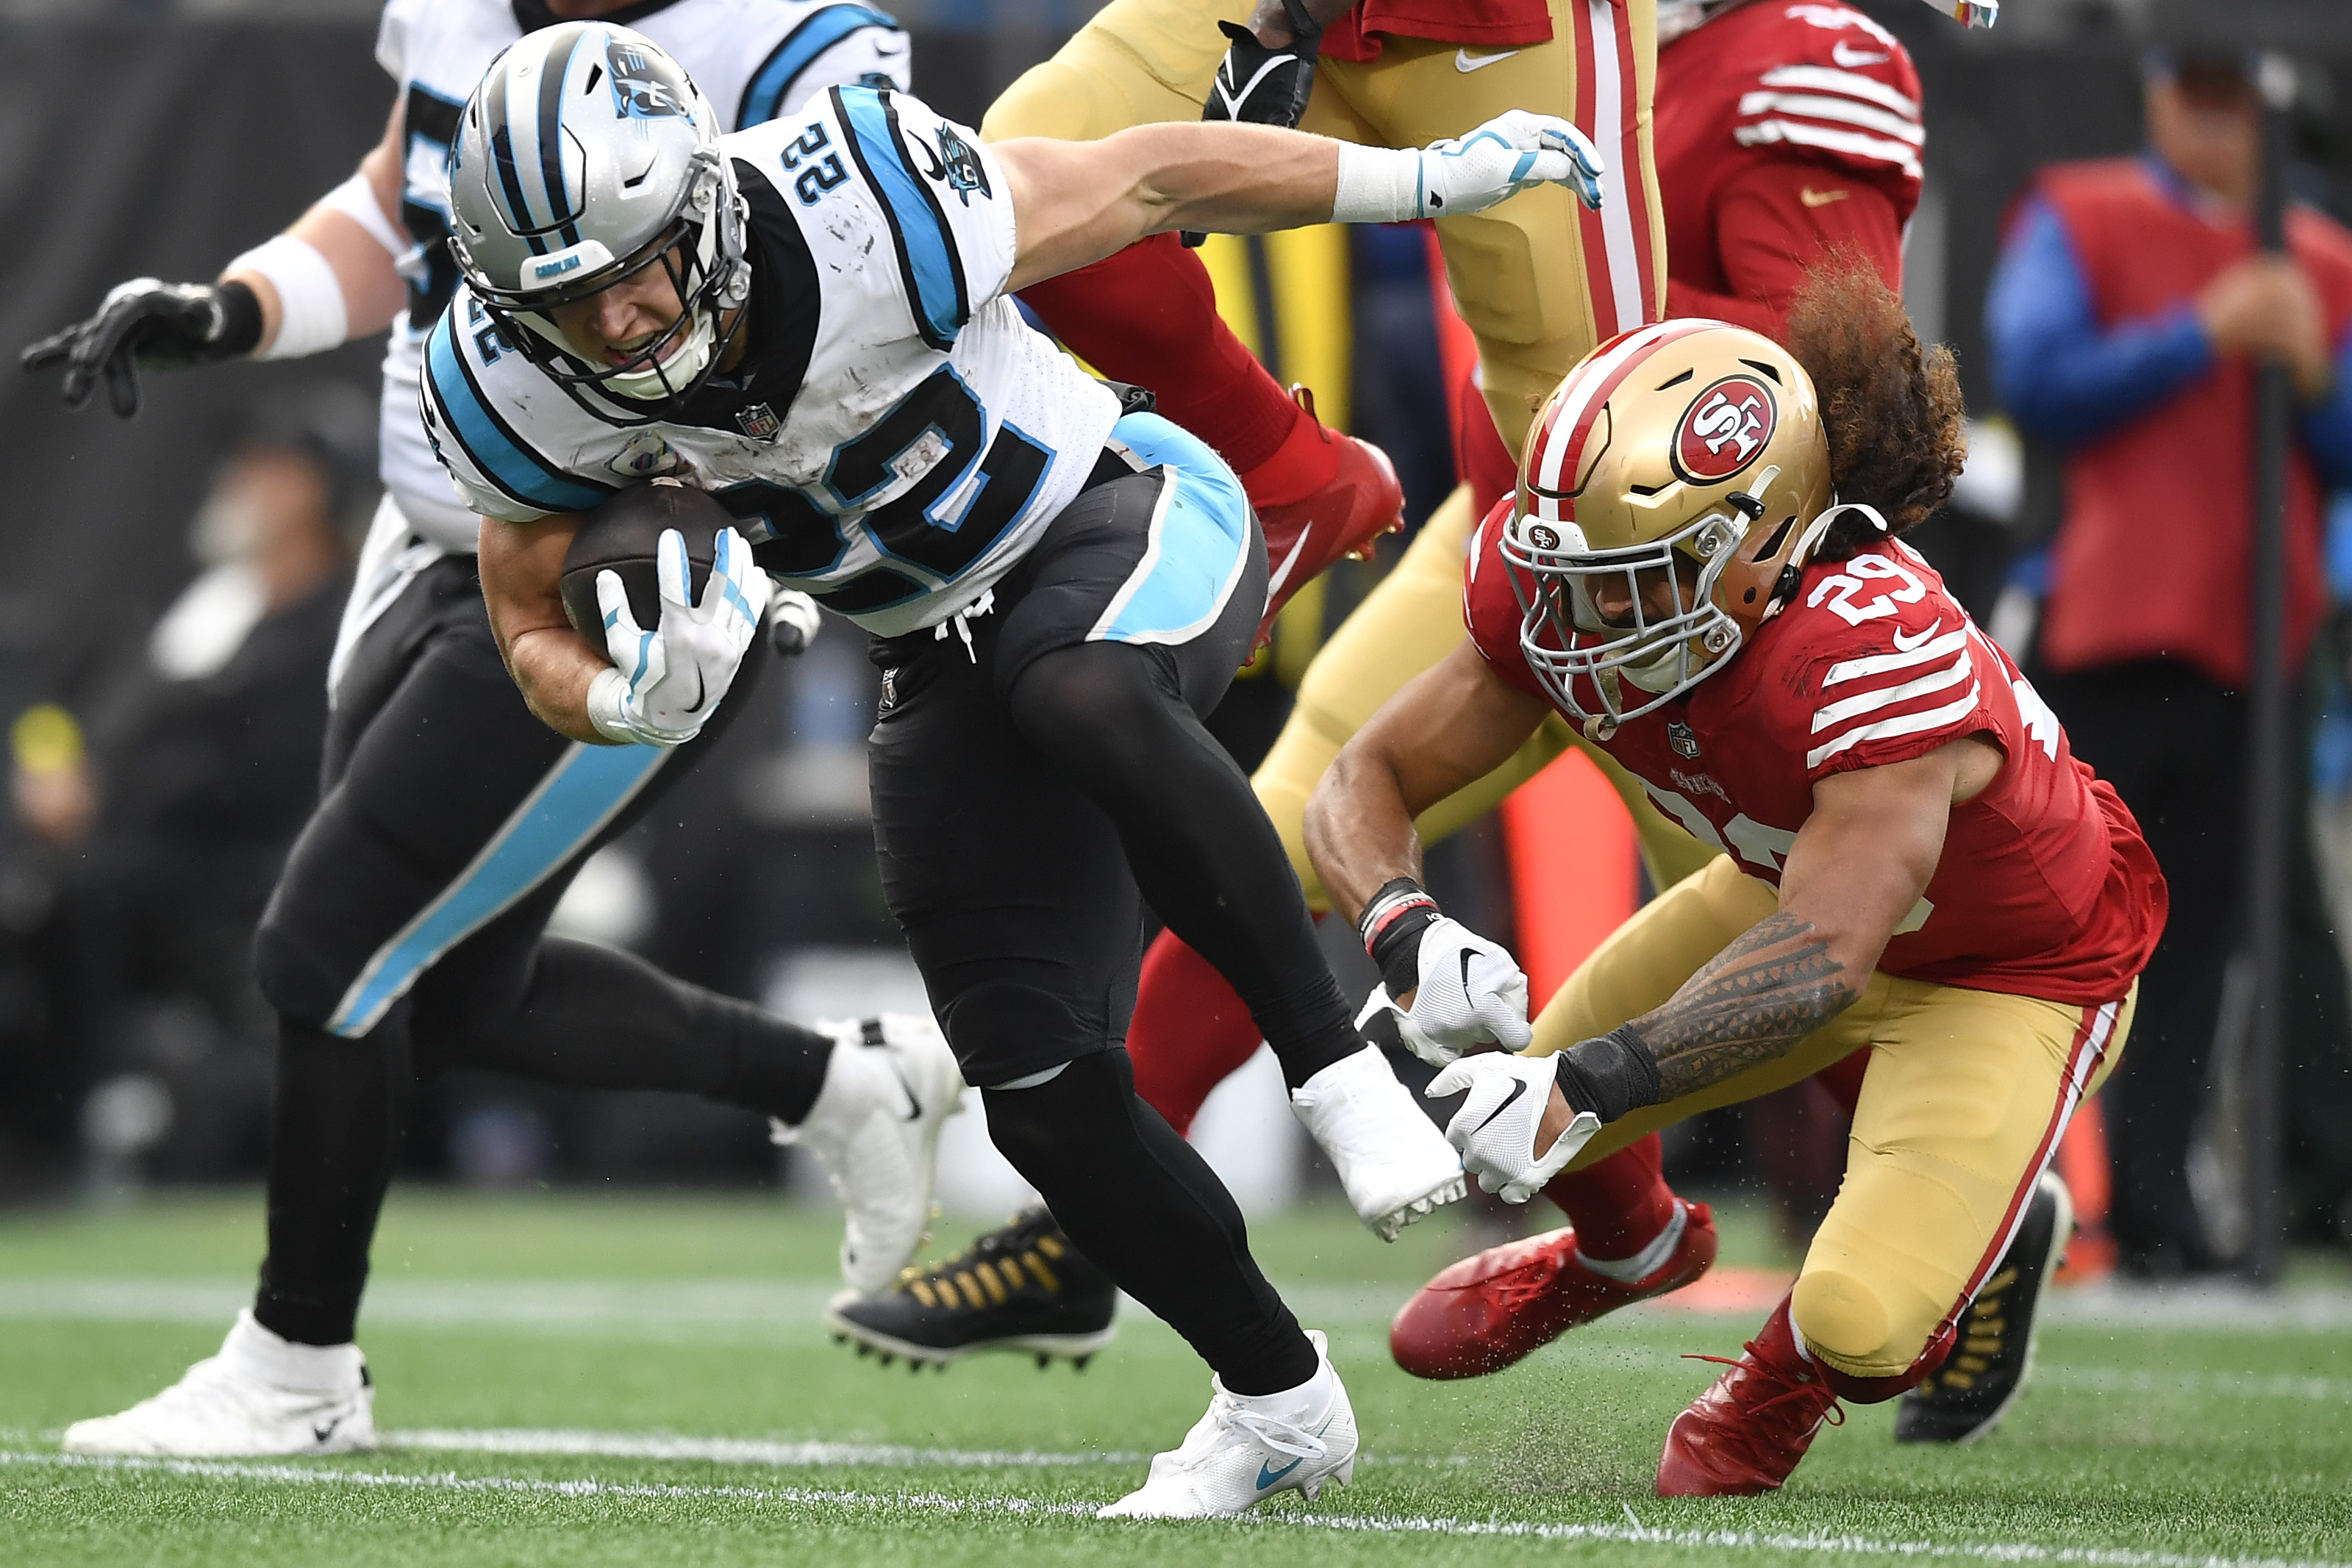 Running back Christian McCaffrey (#22) of the Carolina Panthers rushes with the ball in the game against the San Francisco 49ers at Bank of America Stadium in Charlotte, North Carolina, October 9, 2022. /CFP 